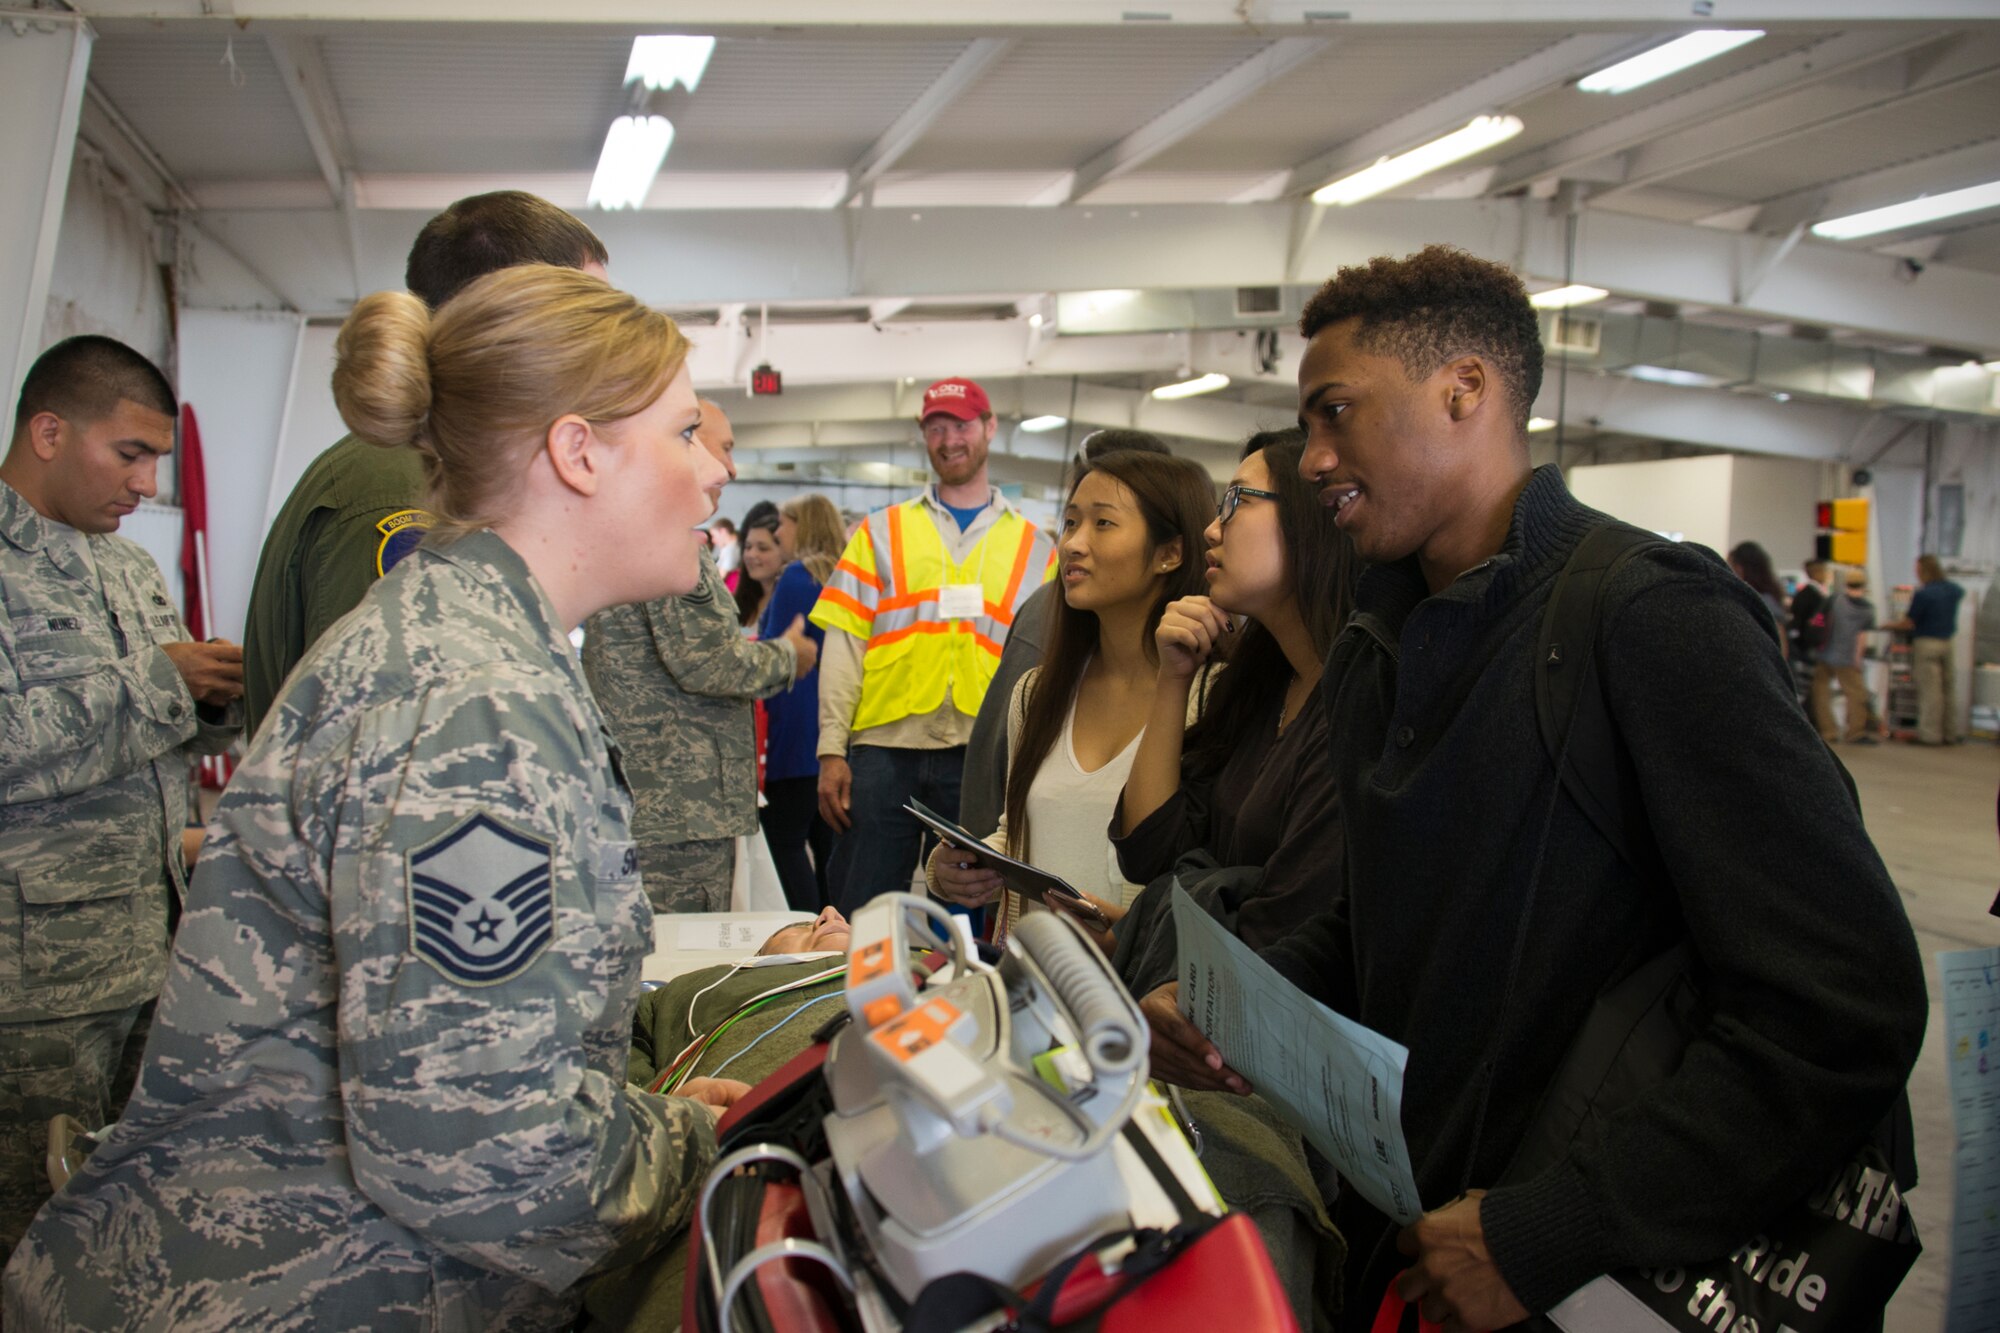 Master Sgt. Melissa Smolka, 459th Aeromedical Evacuation Squadron training manager, informs a student about a career as an air transport medic at the 11th annual Virginia Department of Transportation Career Fair at Prince William County Fairgrounds Oct. 8, 2015. The event, which drew more than 1,300 students from the Prince William County area, provided an opportunity for youths to learn about careers in the transportation industry. The 459th was on hand to discuss potential career paths as pilots, boom operators and inflight medics. (U.S. Air Force photo by Staff Sgt. Kat Justen)